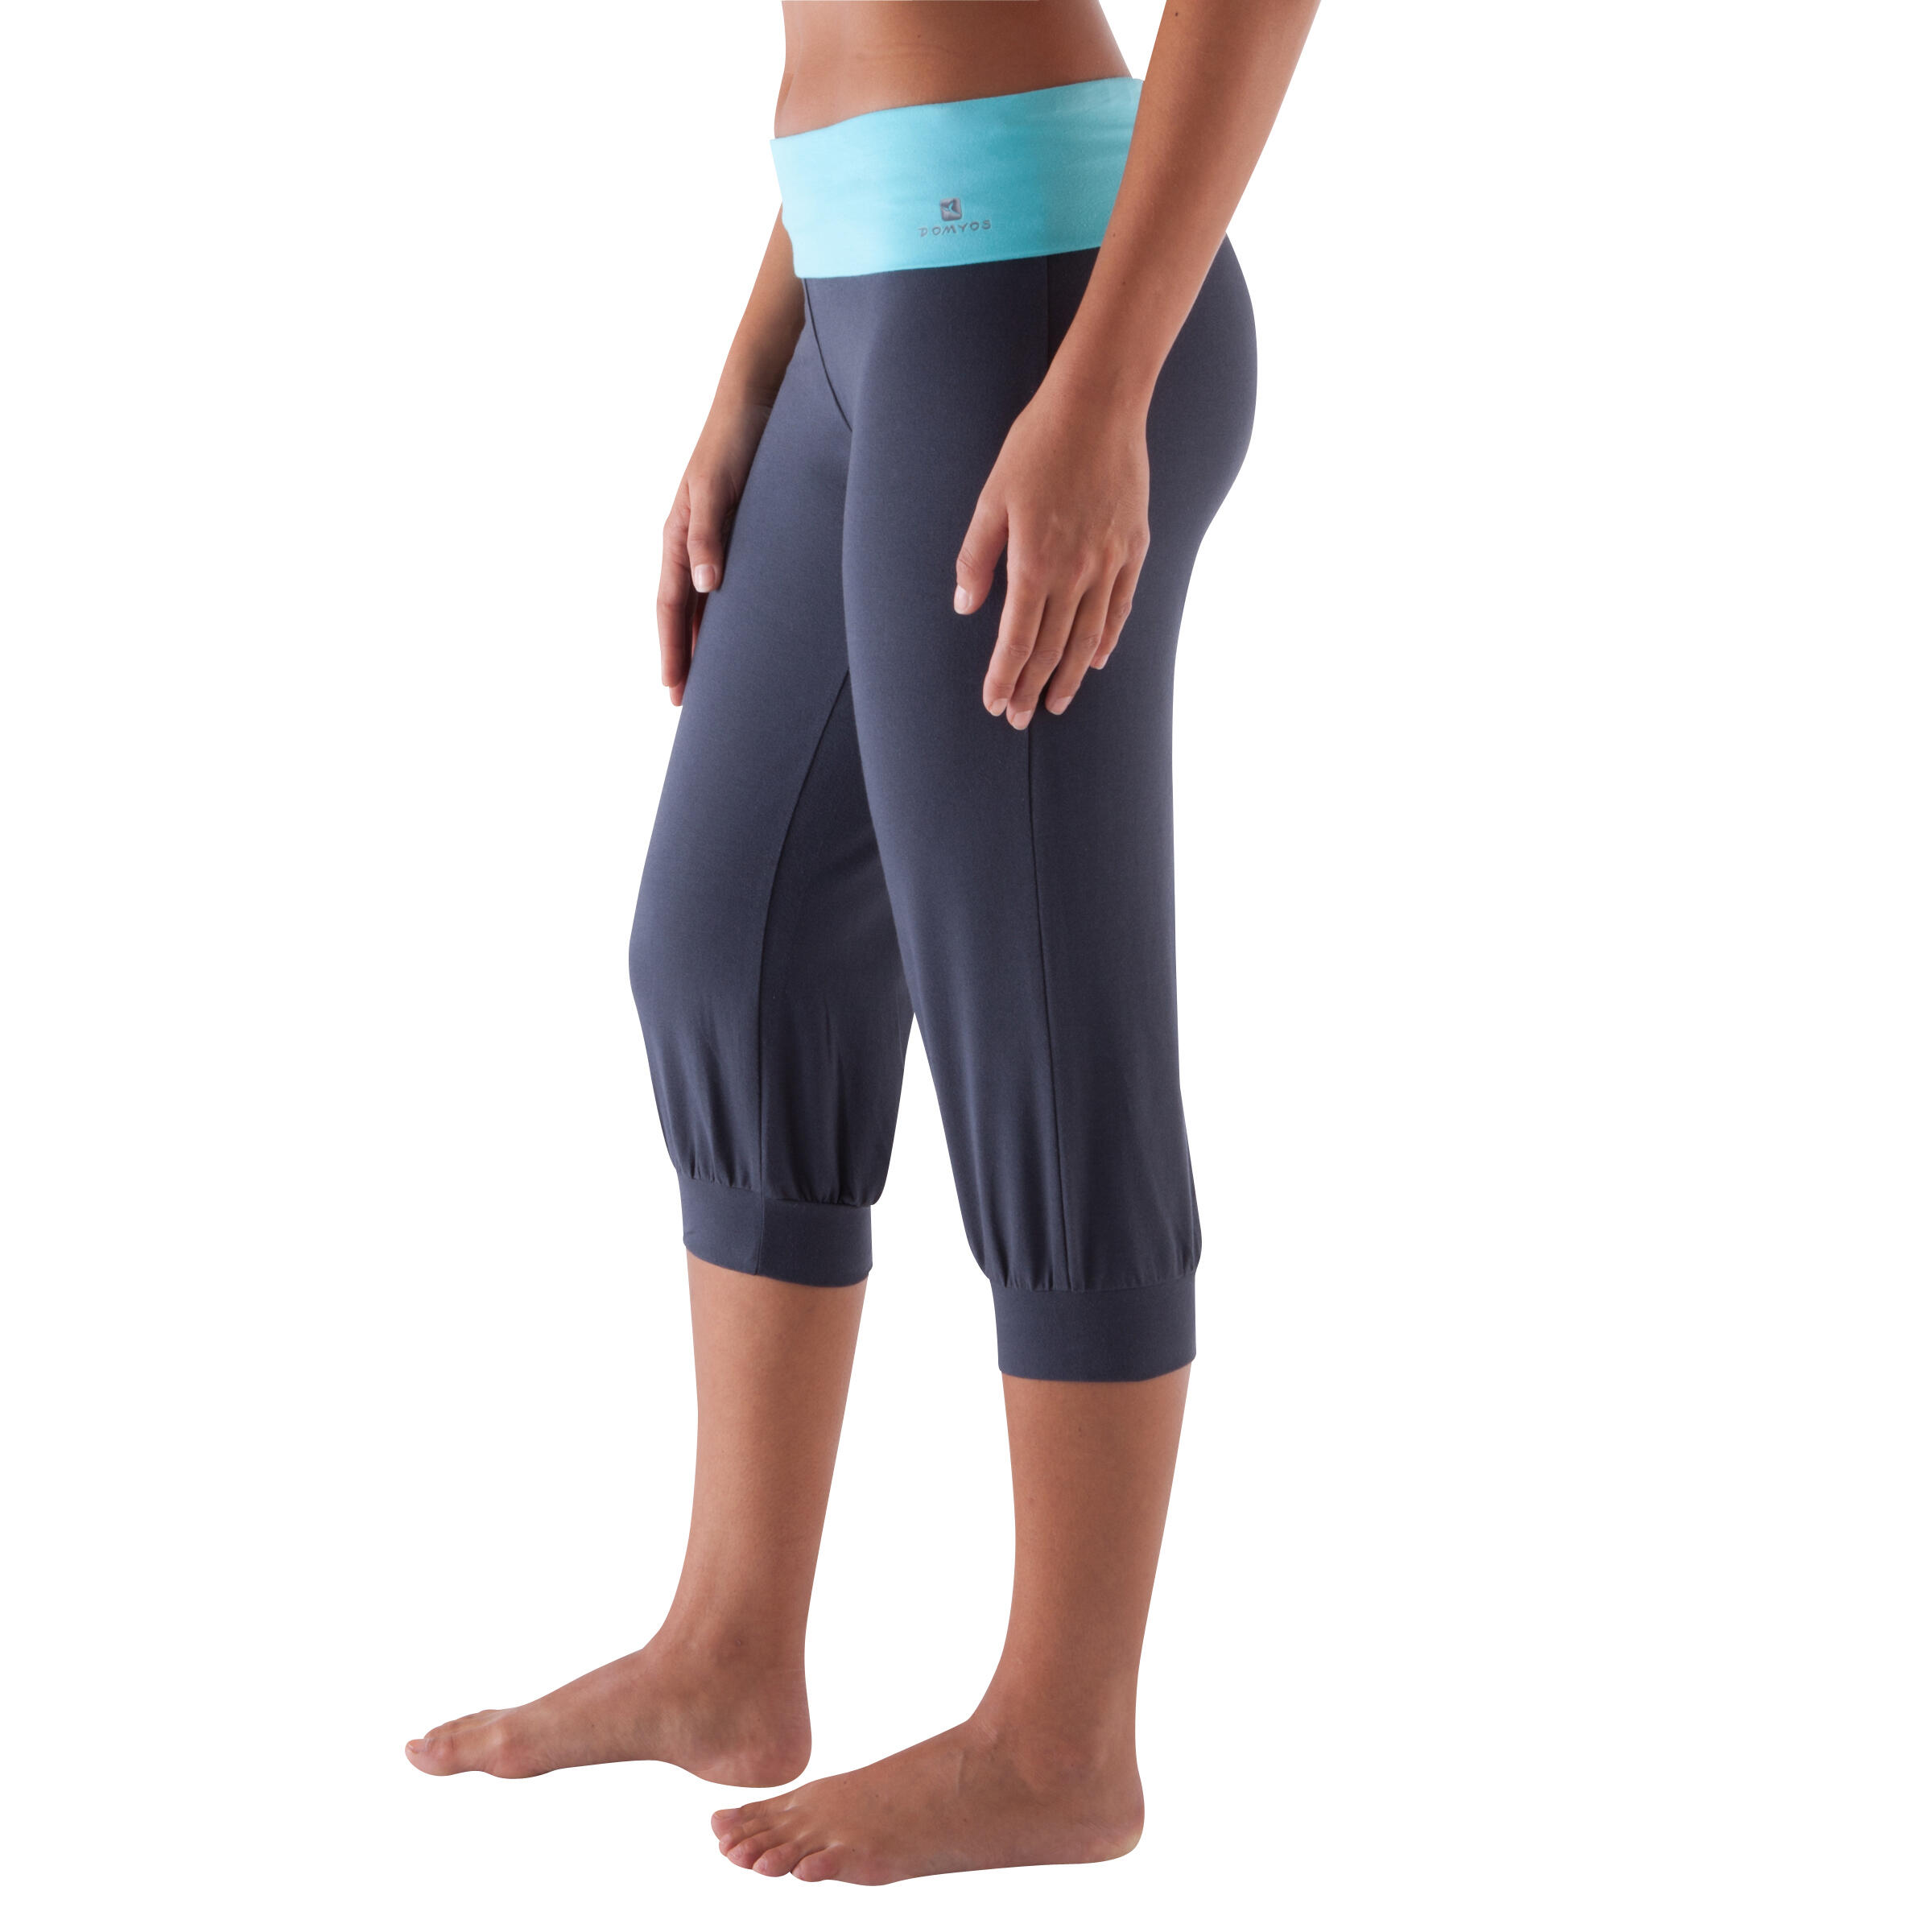 Women's Gentle Gym Yoga and Pilates Organic-Cotton Cropped Bottoms - Grey/Blue 4/10